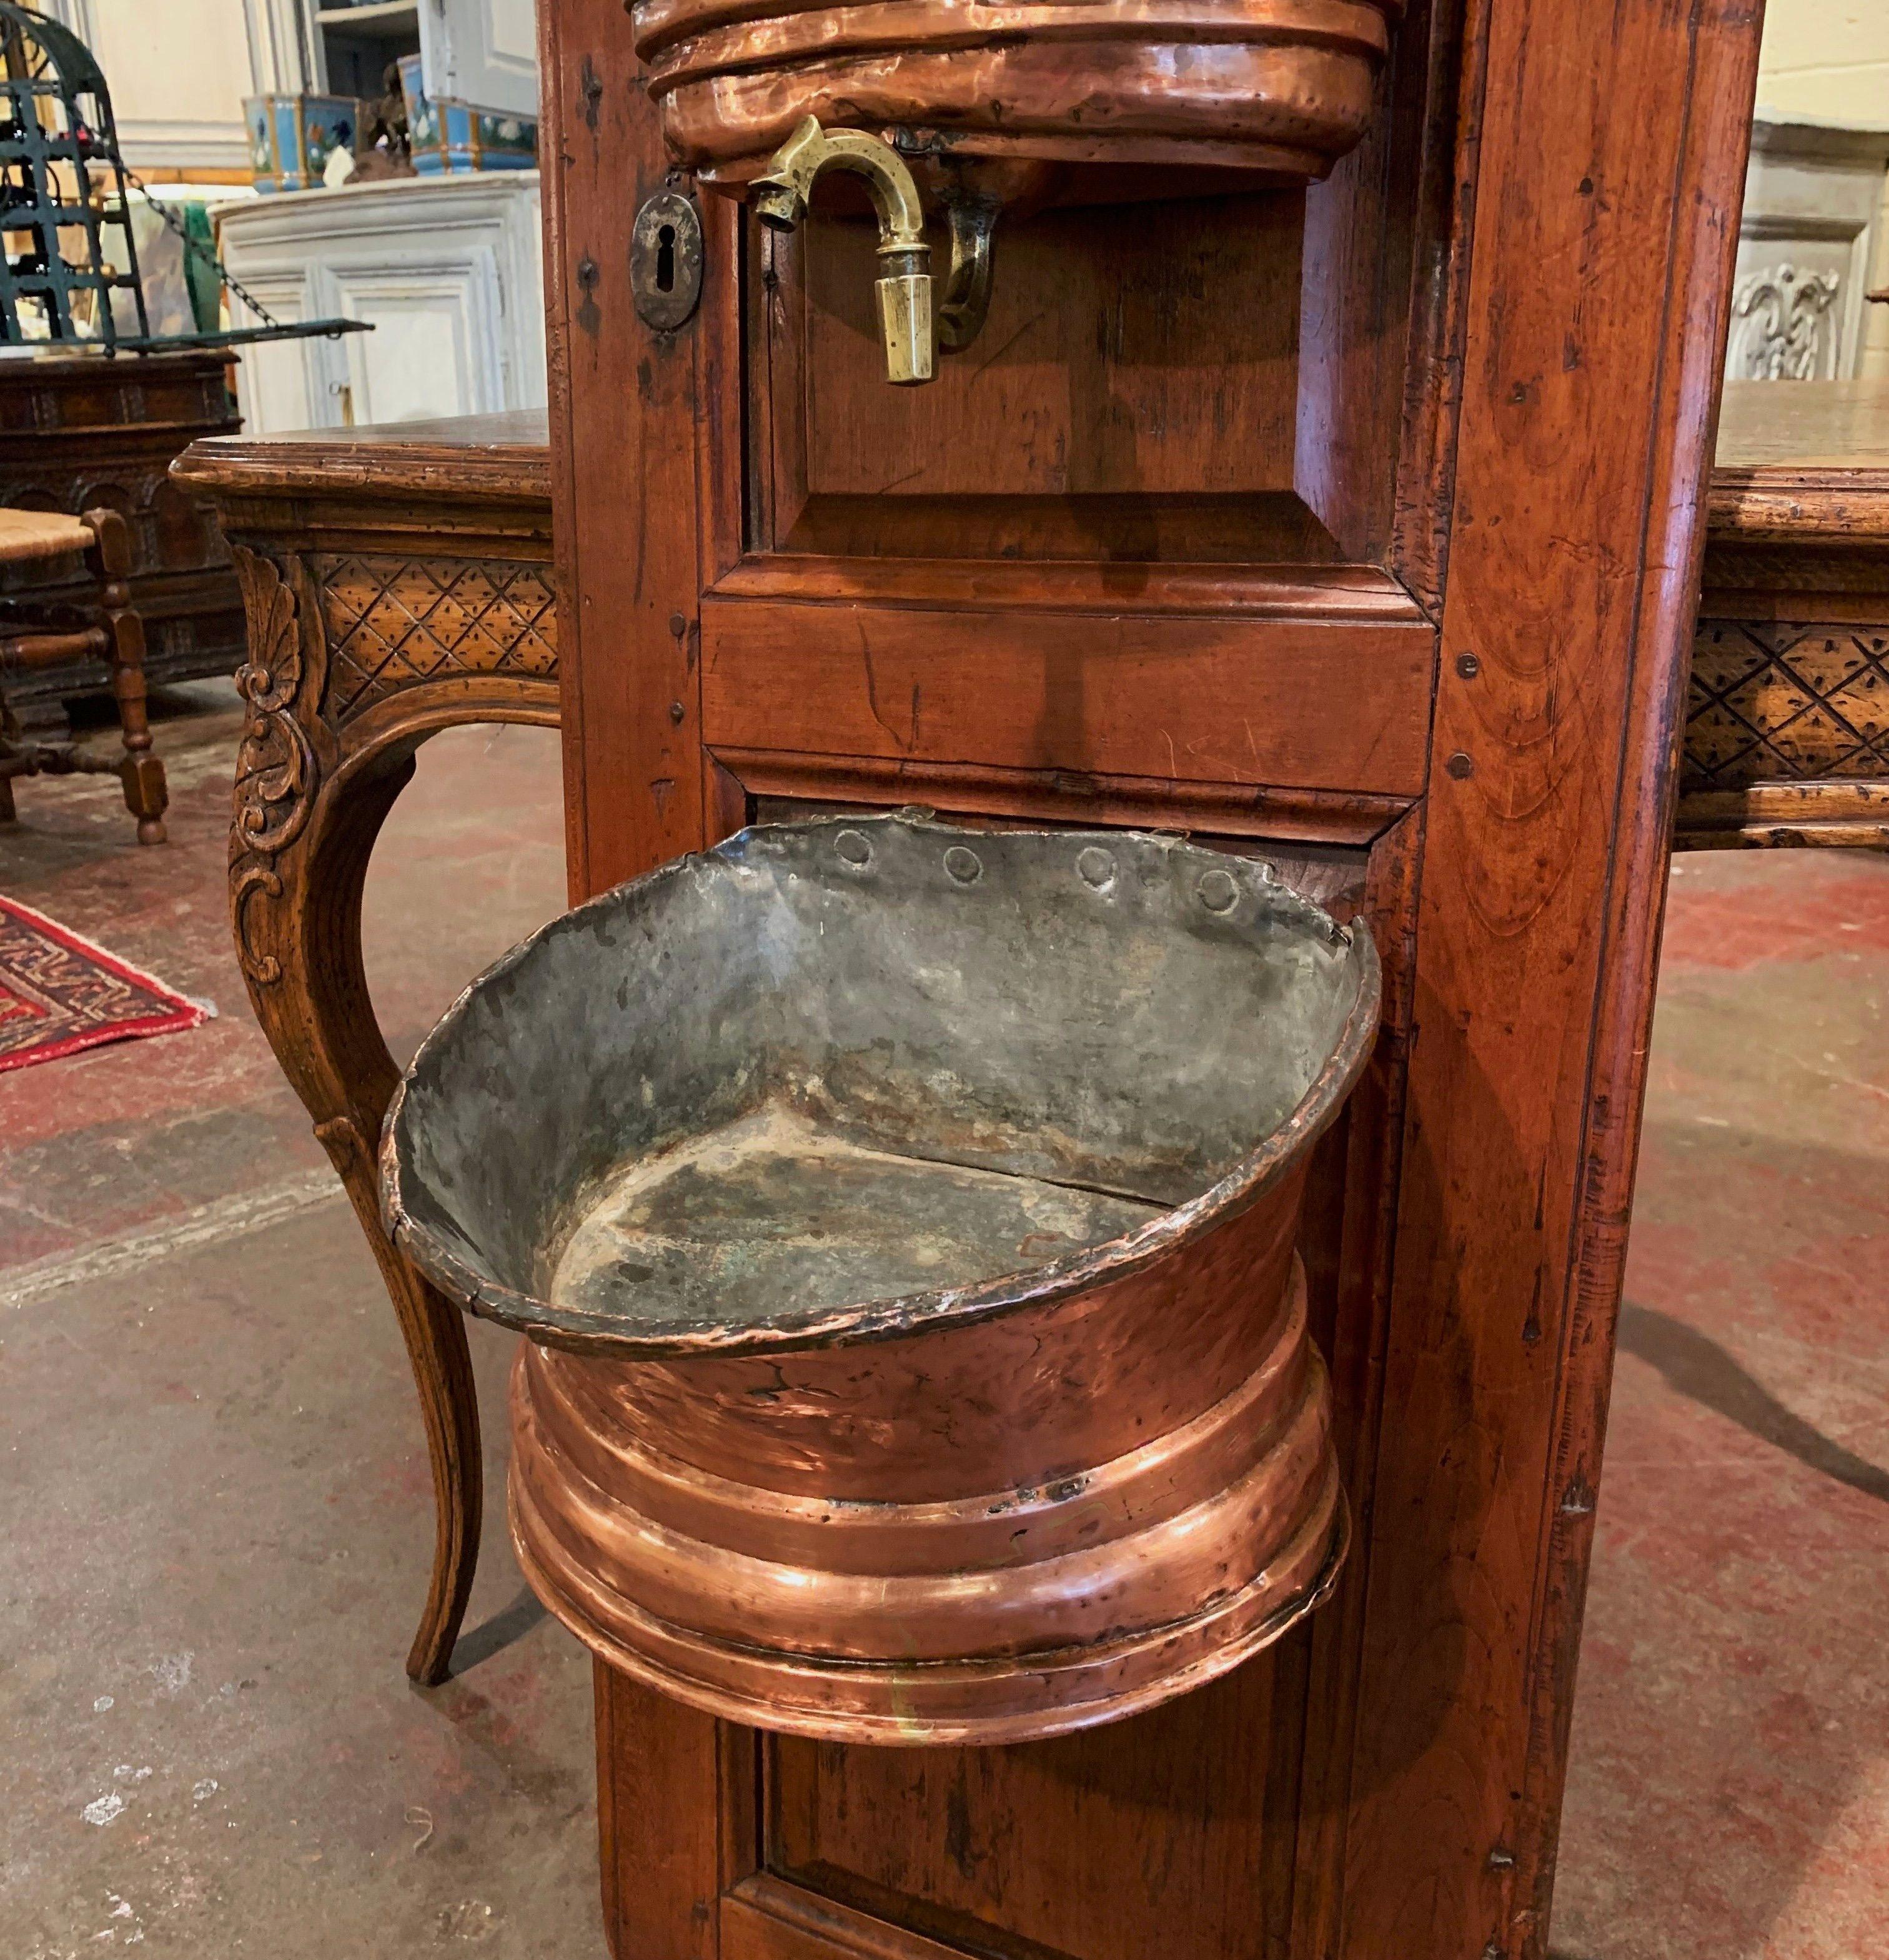 Hand-Carved 18th Century French Brass Lavabo Fountain from Normandy on Carved Cherry Door For Sale